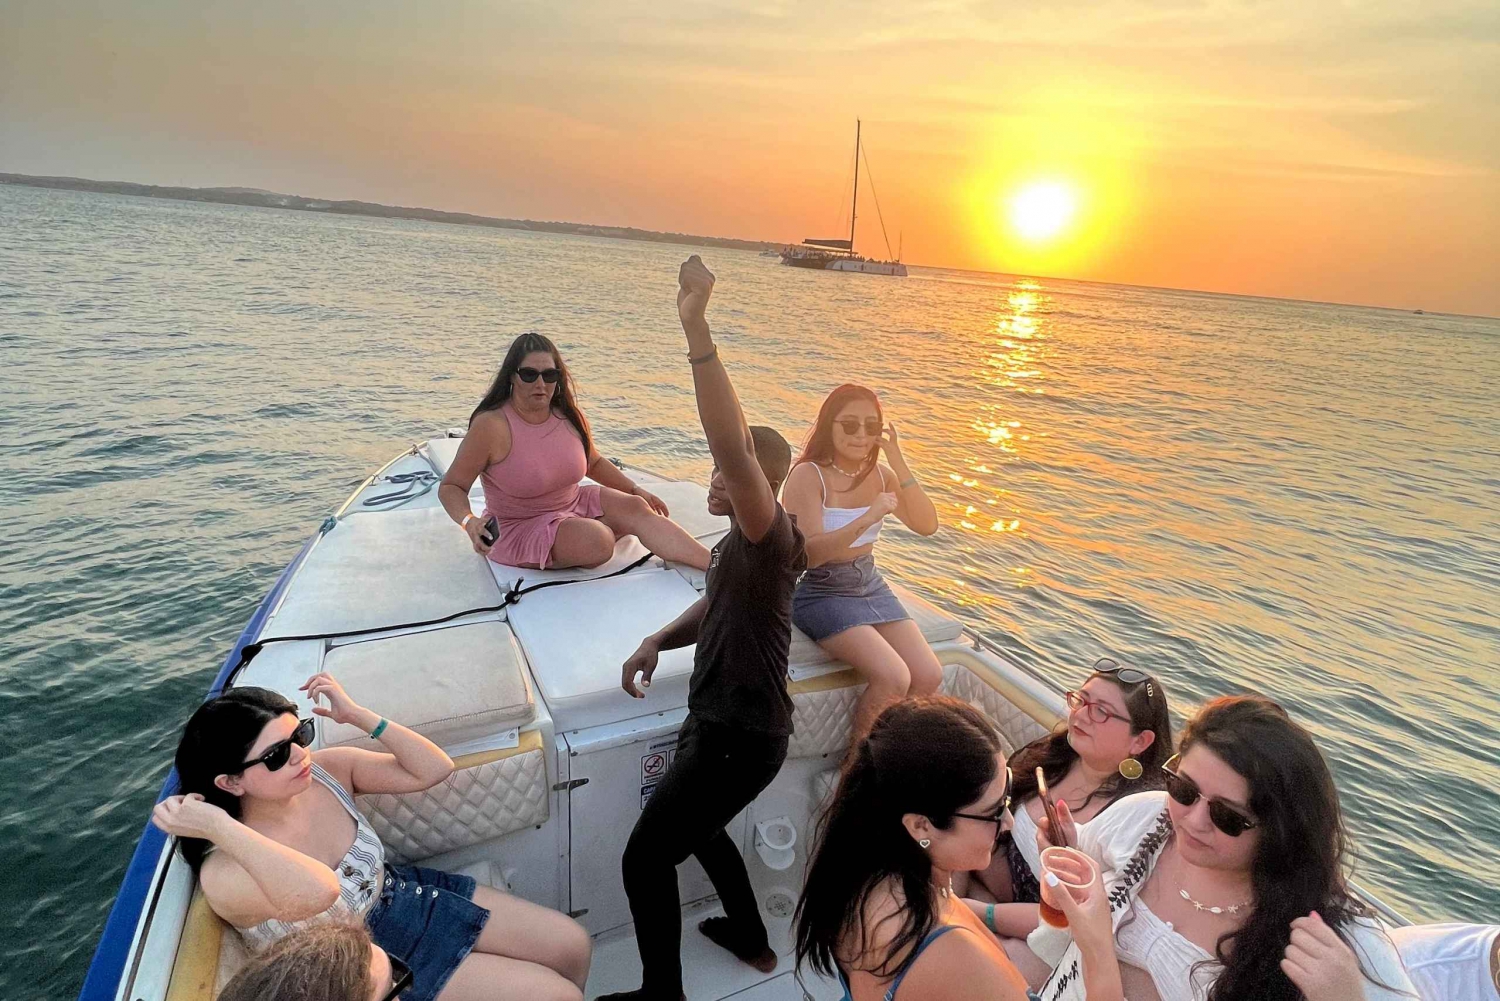 Fun sunset tour with drinks and music included